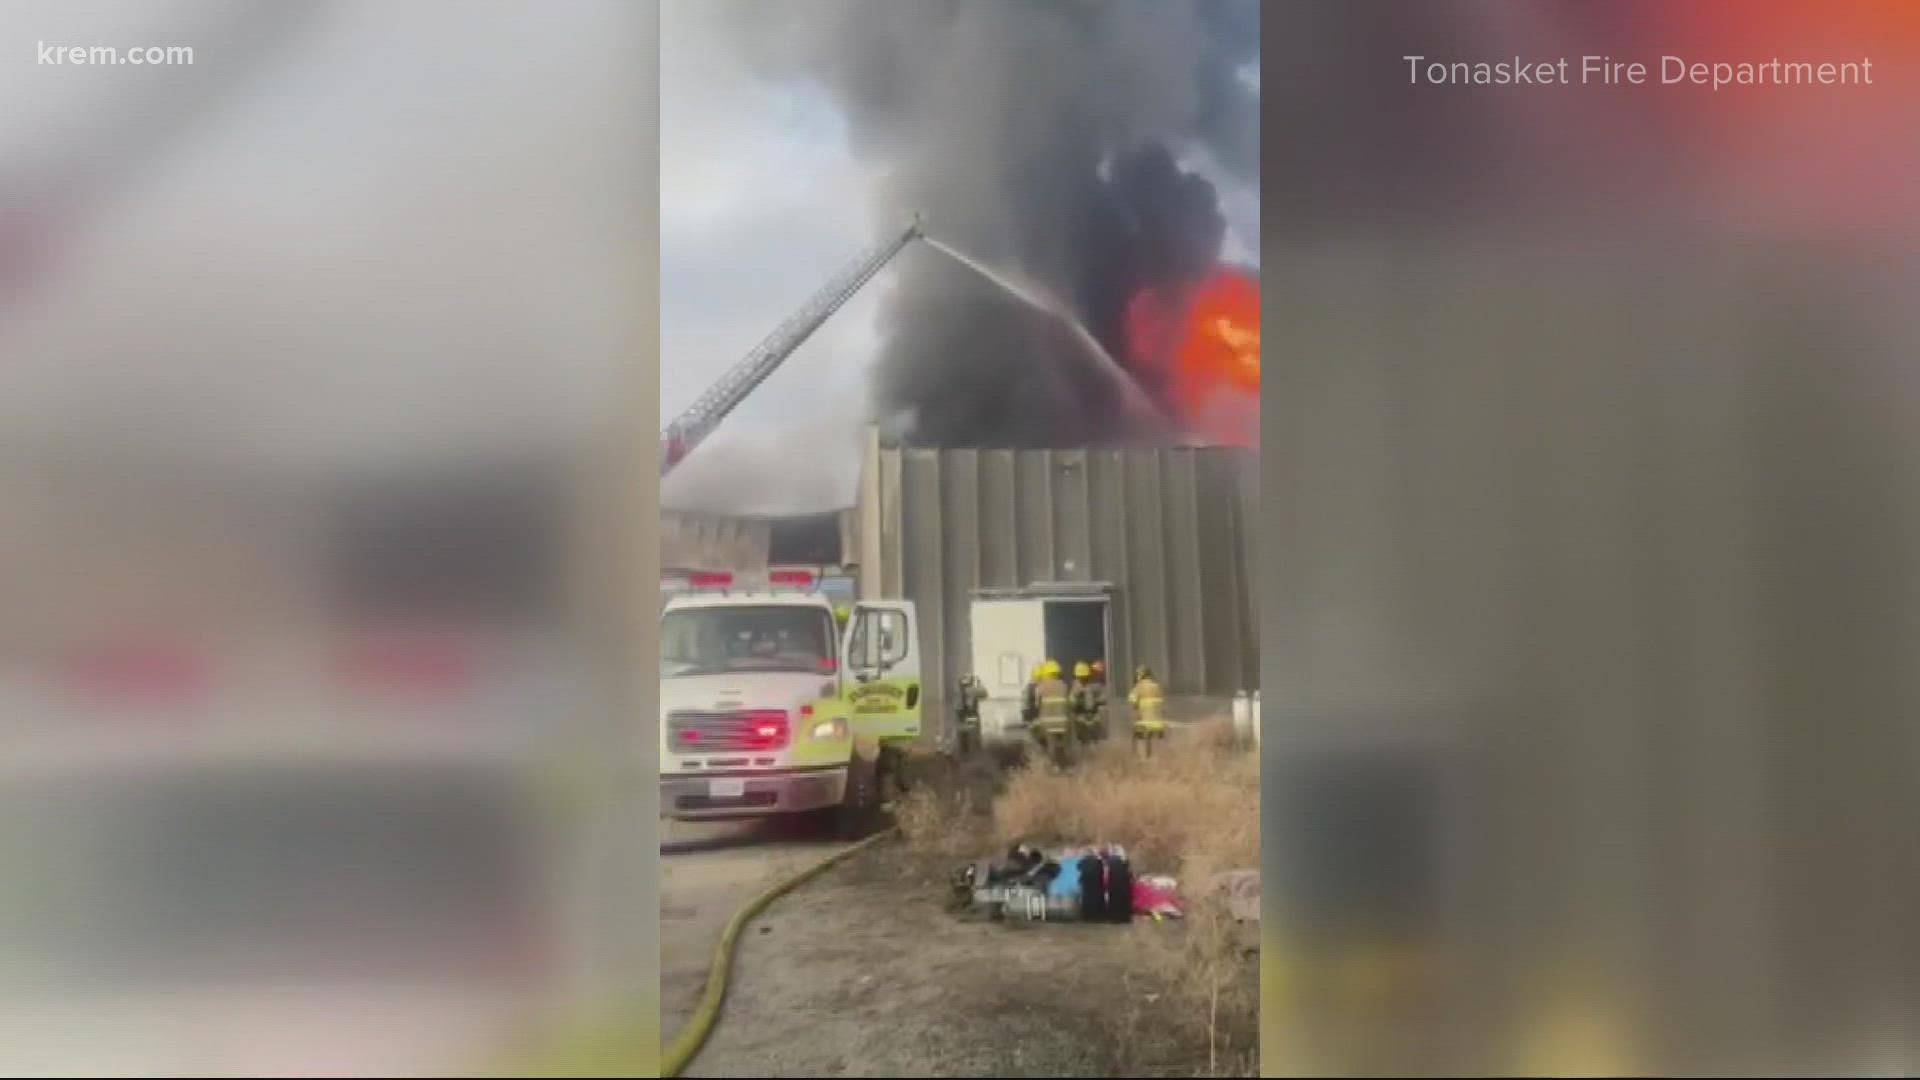 Flames and black smoke from the warehouse, which in the past was used to store apples, could be seen for miles, firefighters said.